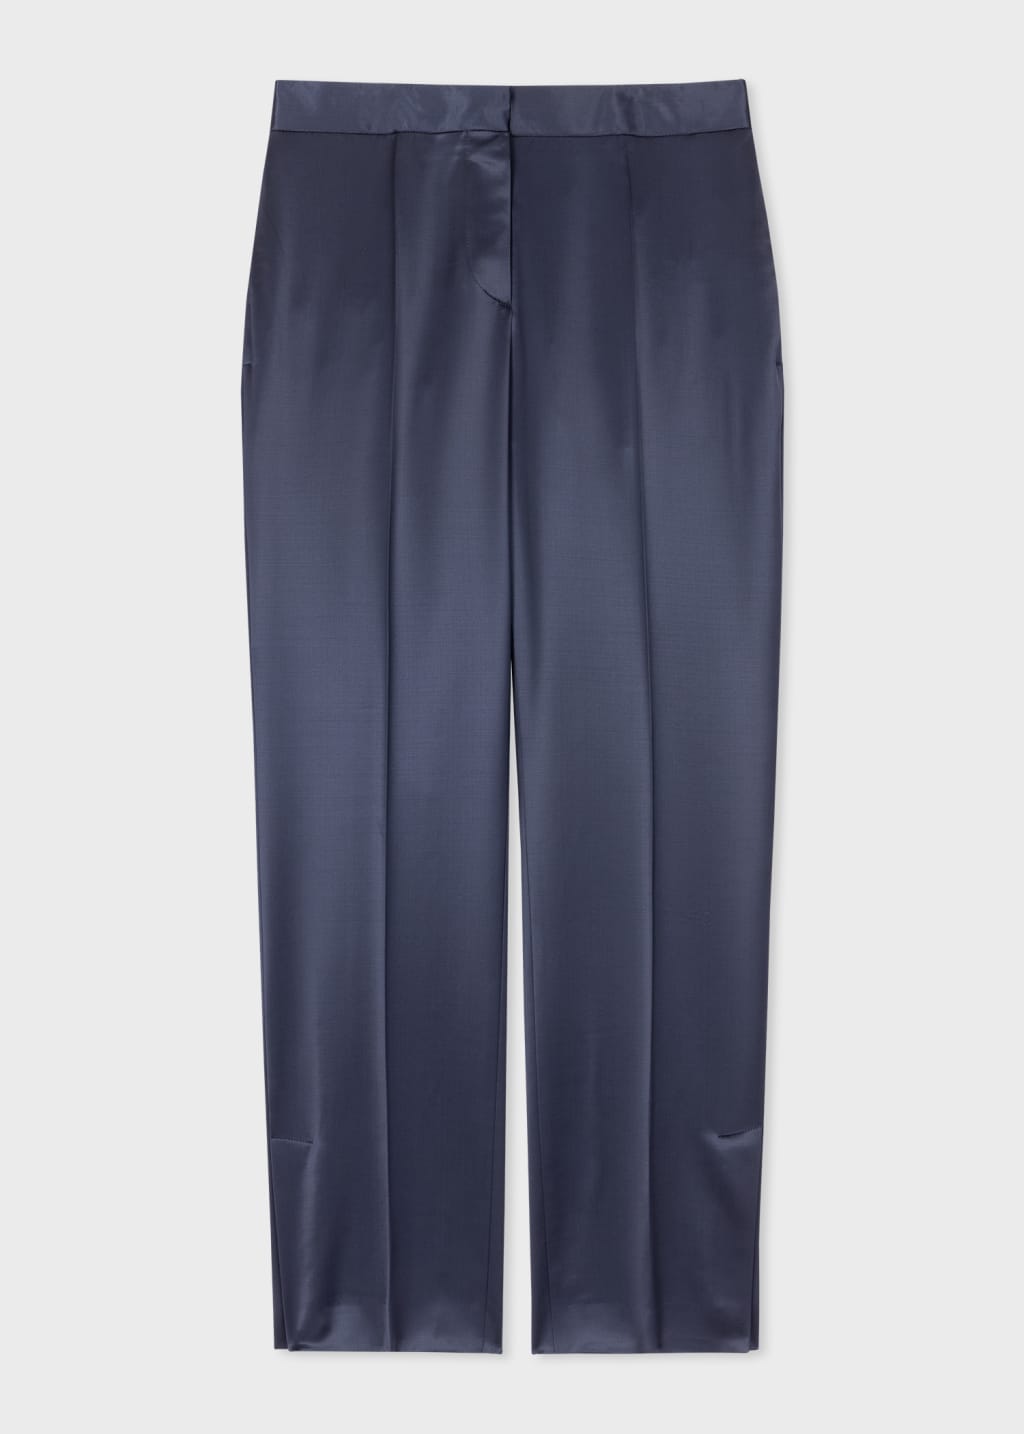 Product View - Women's Navy Satin Kick Flare Trousers by Paul Smith